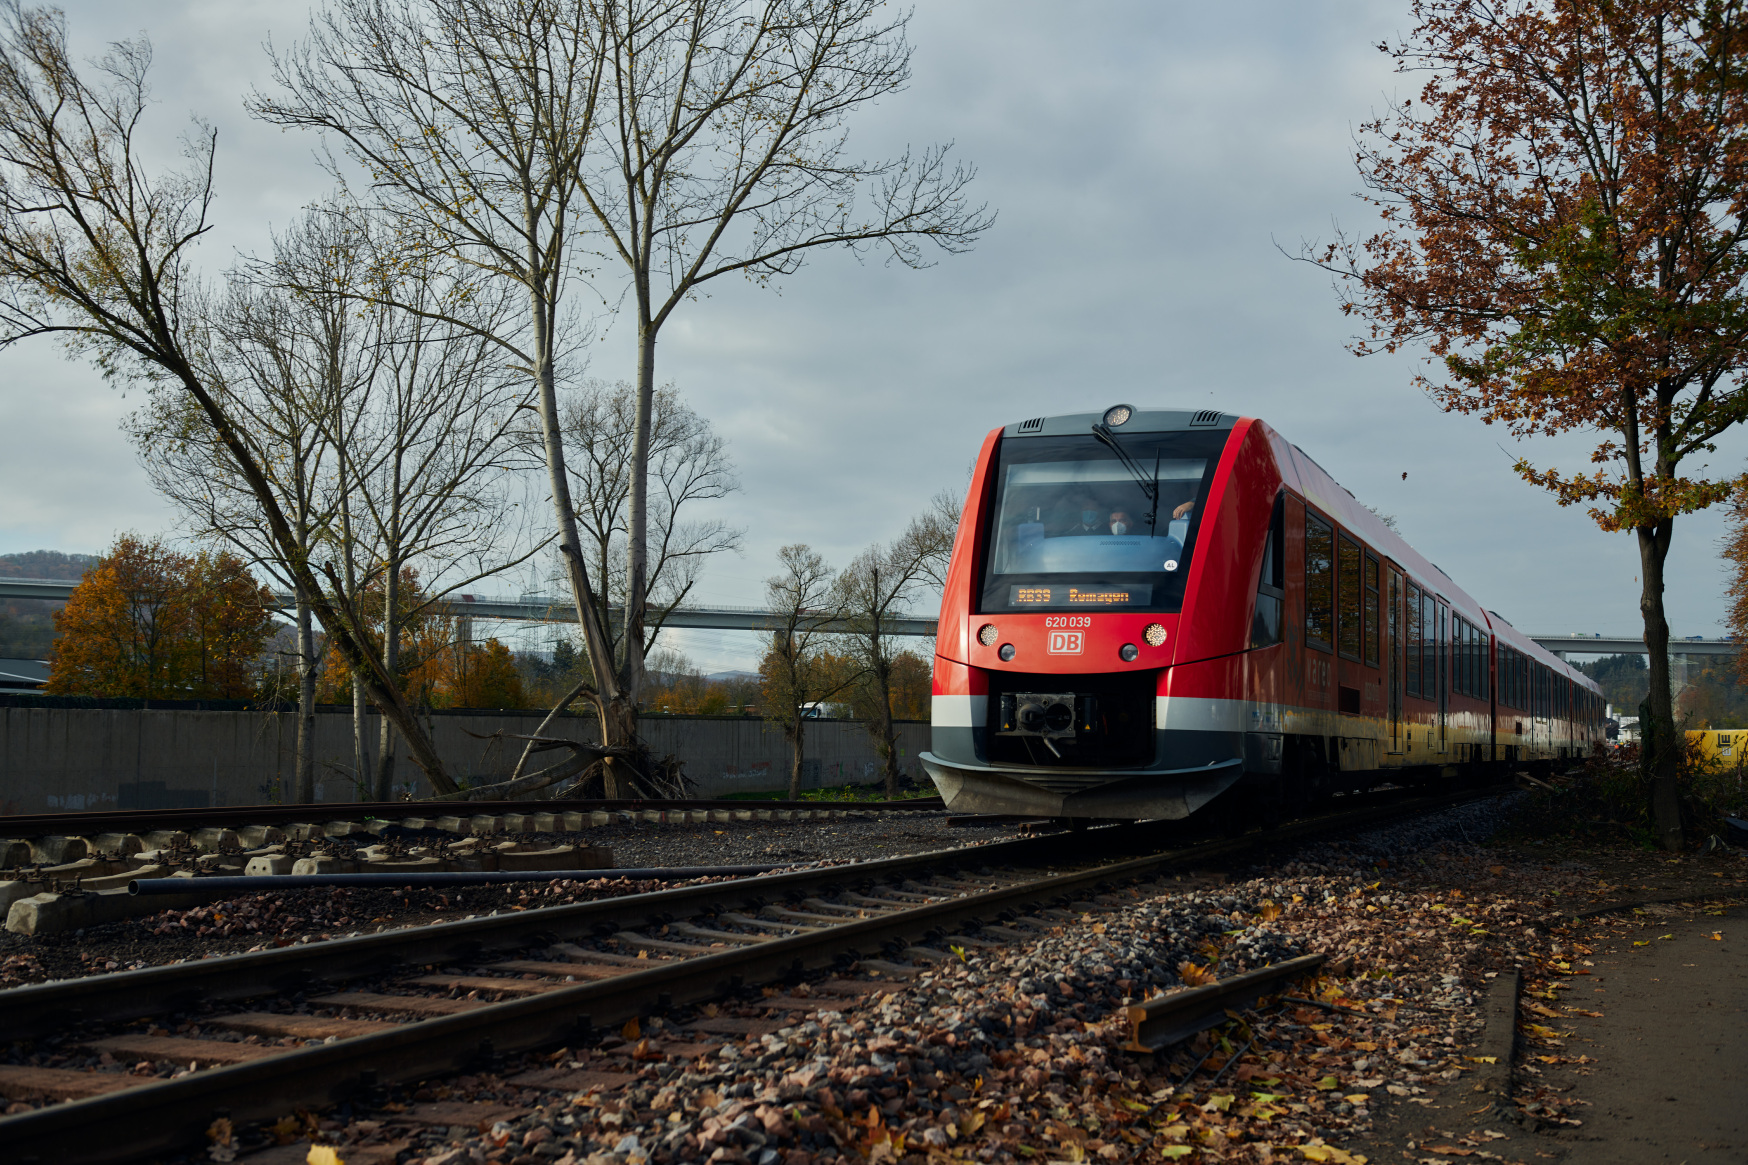 The first section of the Ahr Valley Railway between Remagen and Ahrweiler is open again